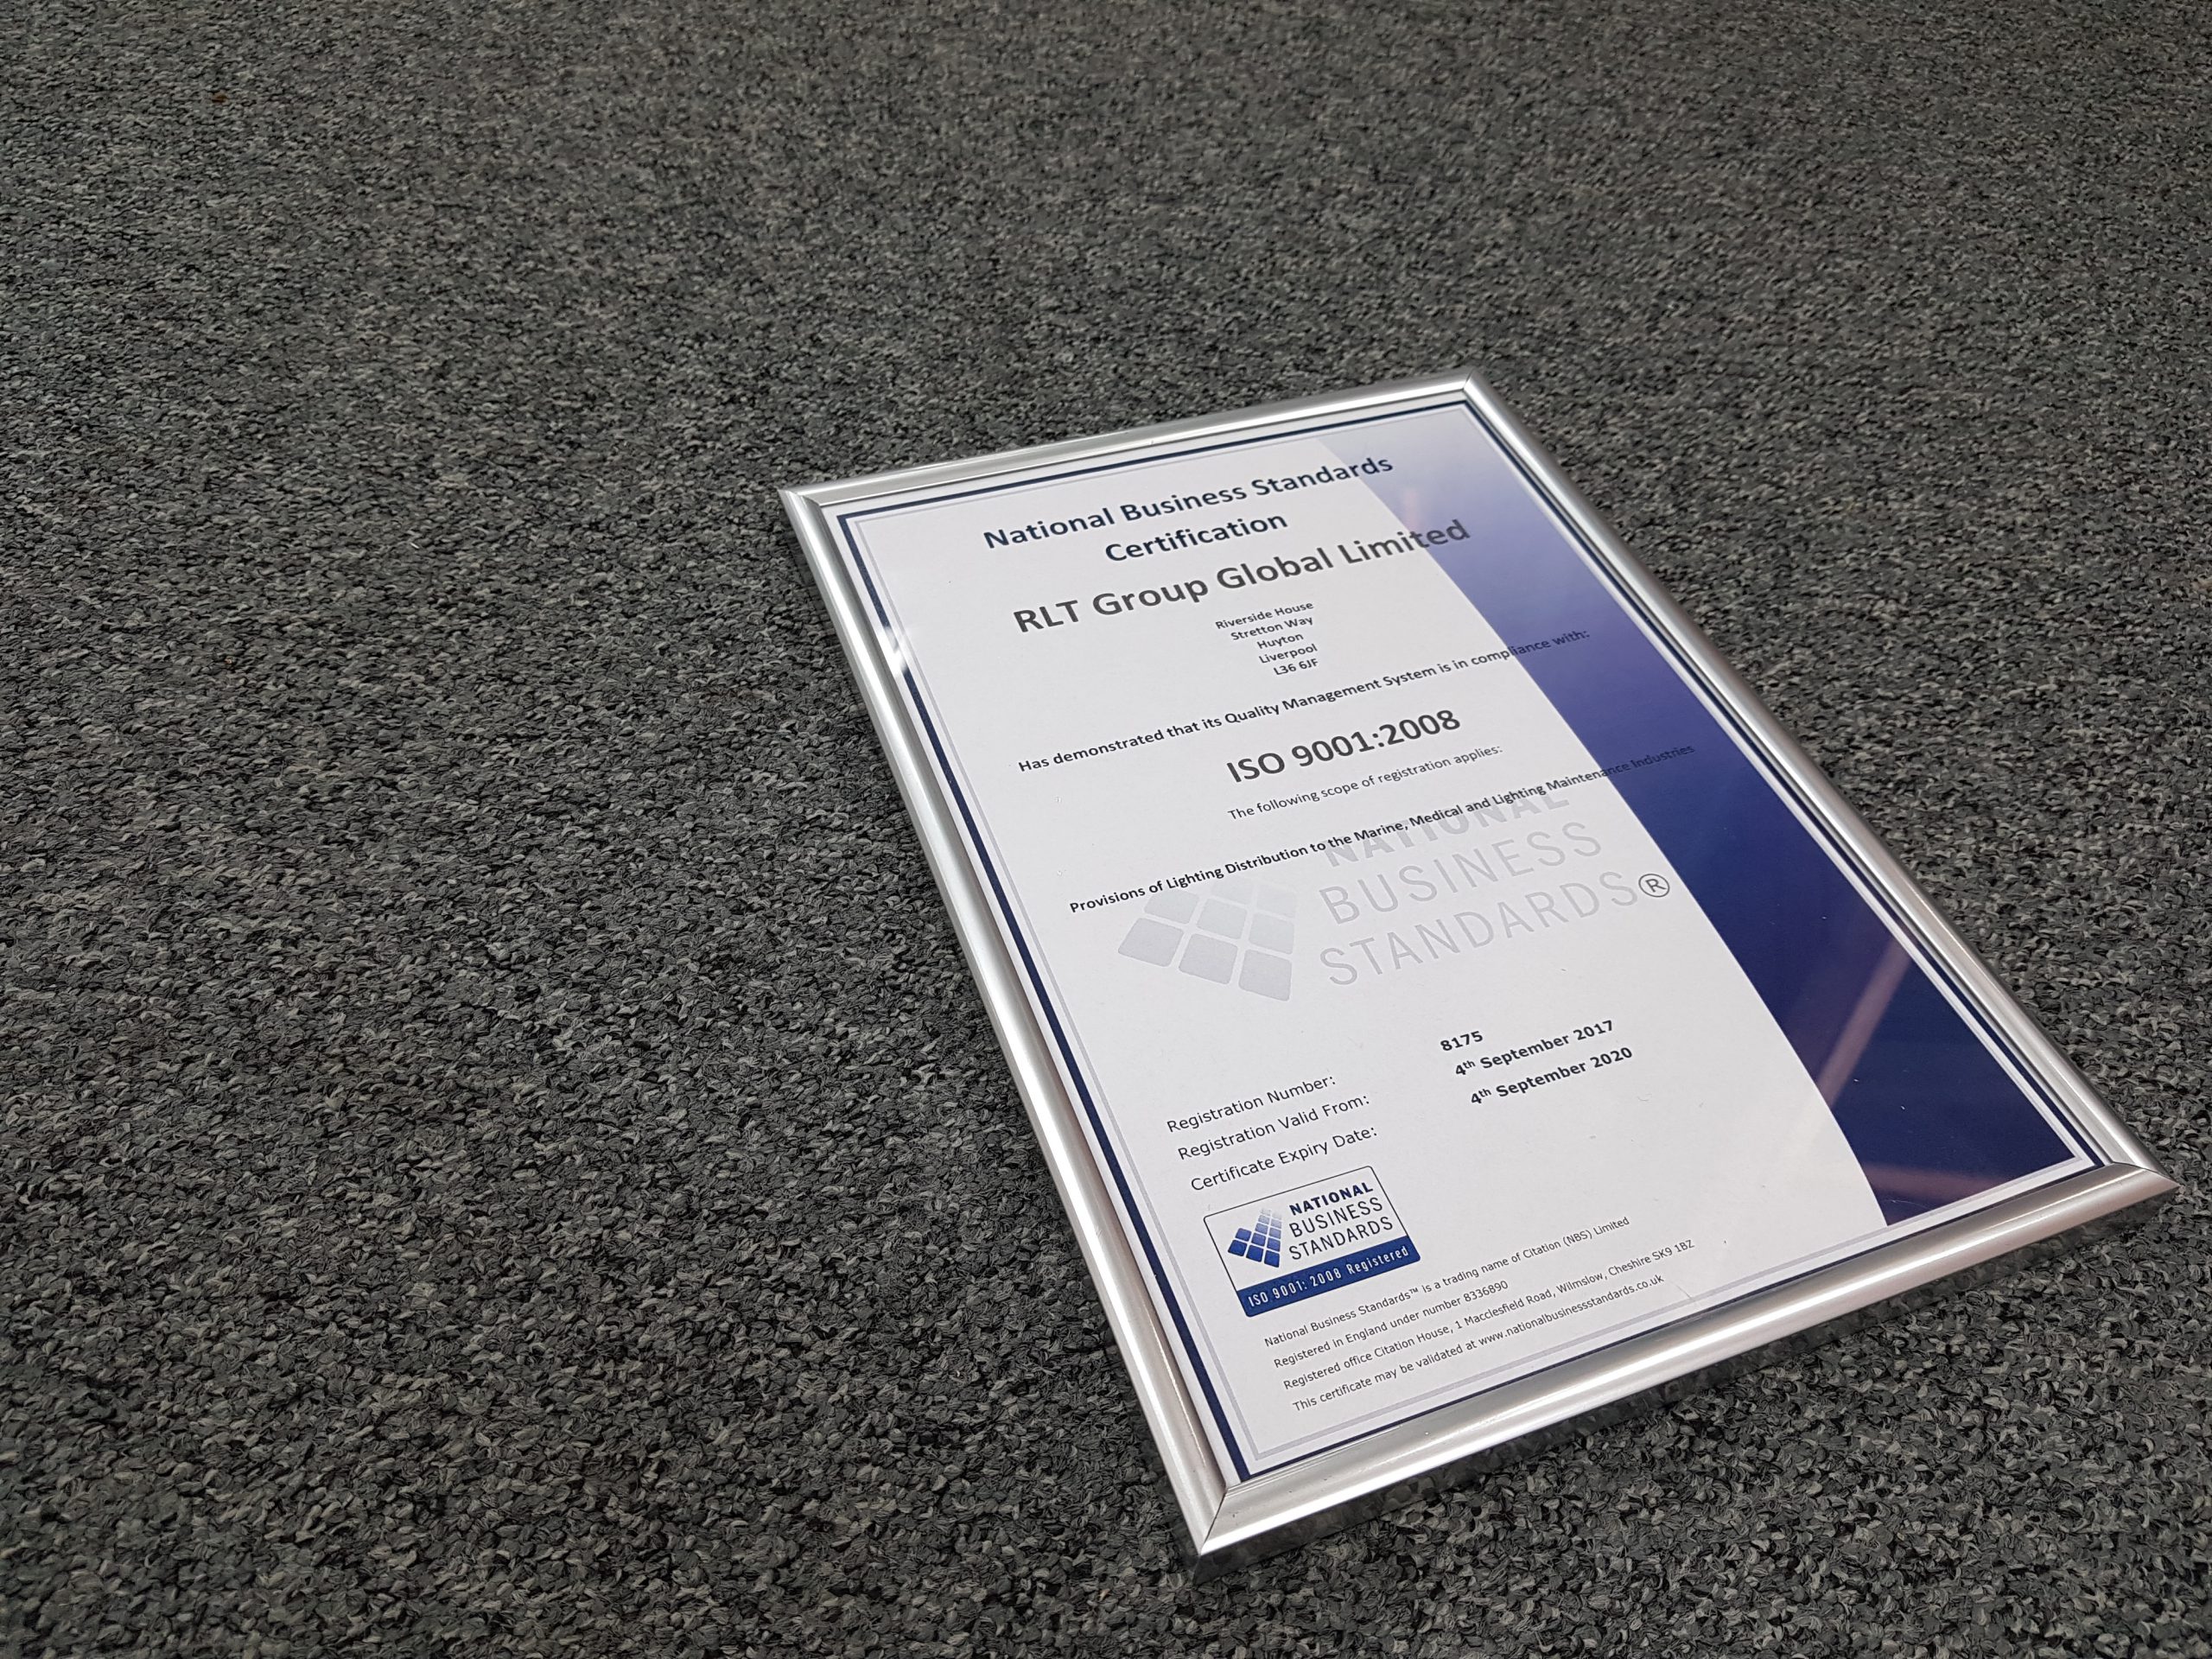 RLT Onsite | ISO9001 certificate achieved…